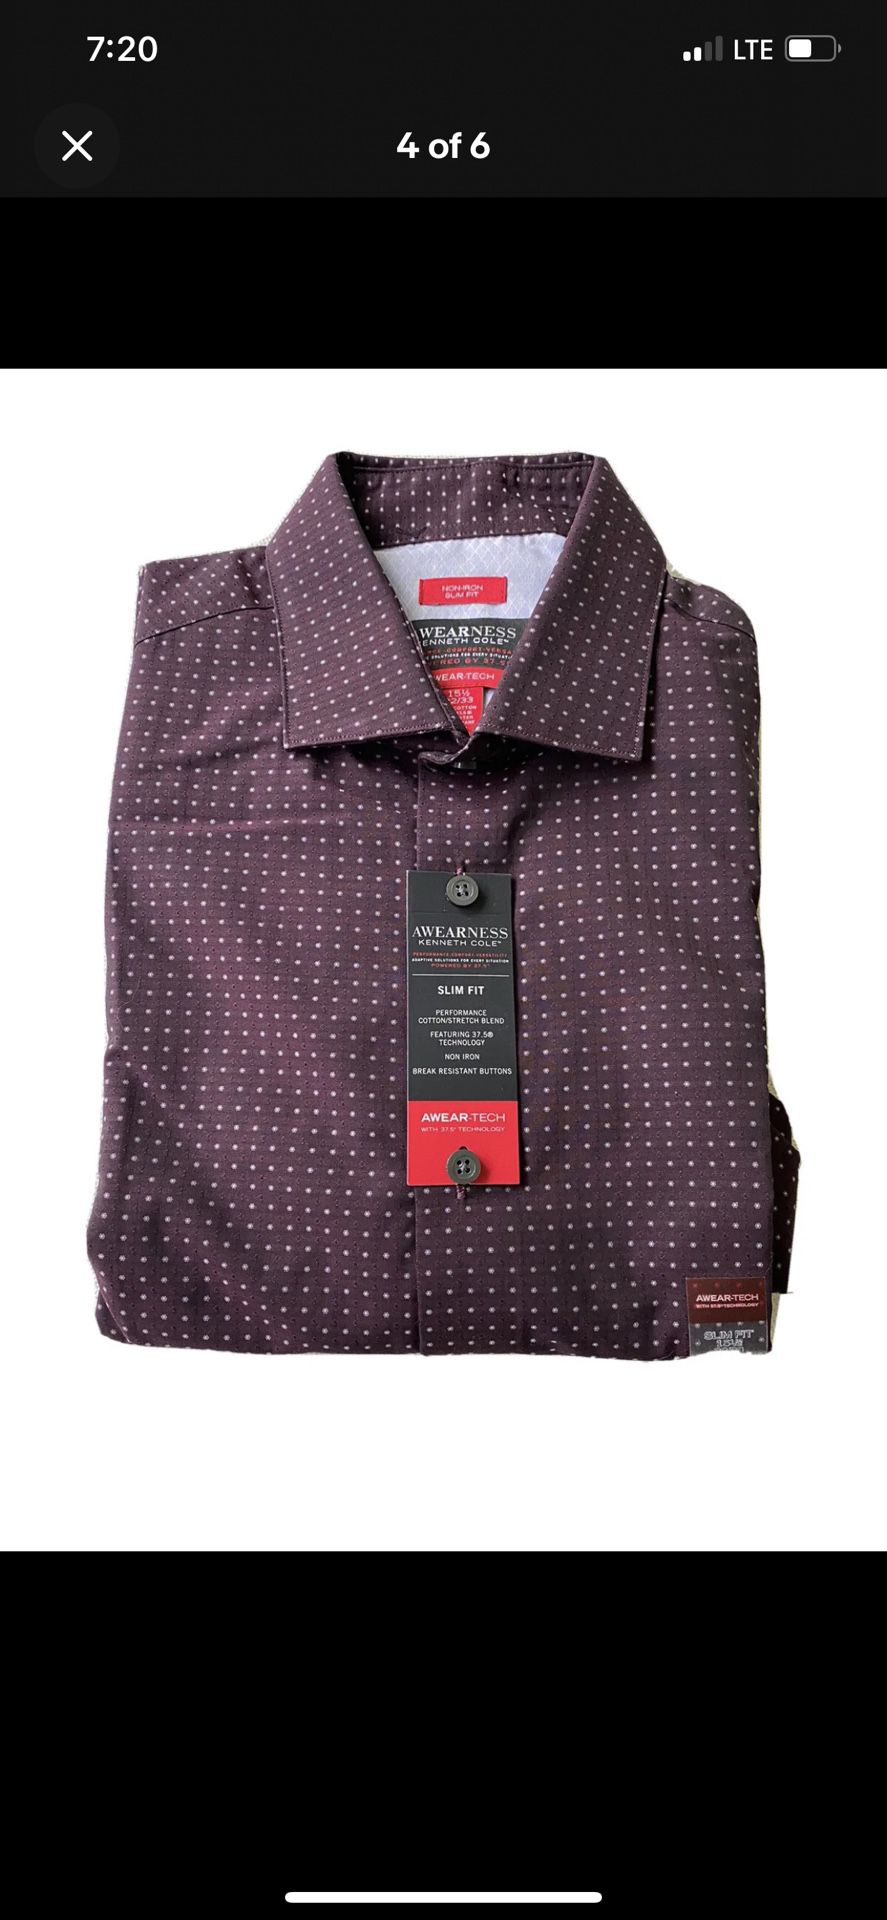 Awareness Kenneth Cole Plaid Dress Shirt Non-Iron Slim Fit Wine Color 15.5 32/33